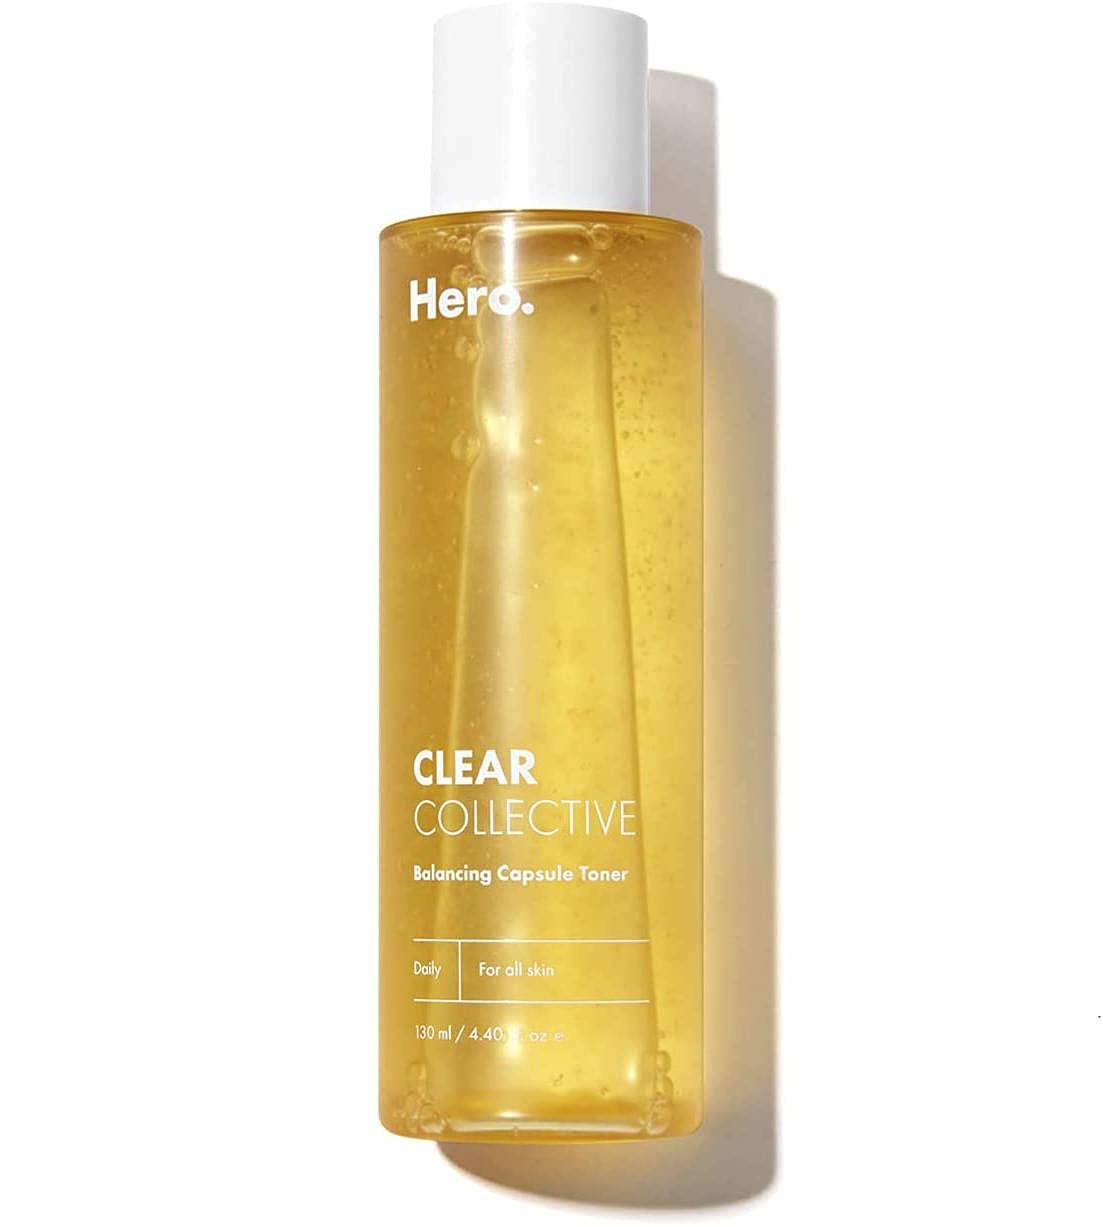 Clear Collective Balancing Capsule Toner from Hero Cosmetics - Daily Facial Toner for All Skin Types, Hydrating Serum for Redness Relief and Dry Skin, Fragrance and Paraben Free (4.39 fl oz)